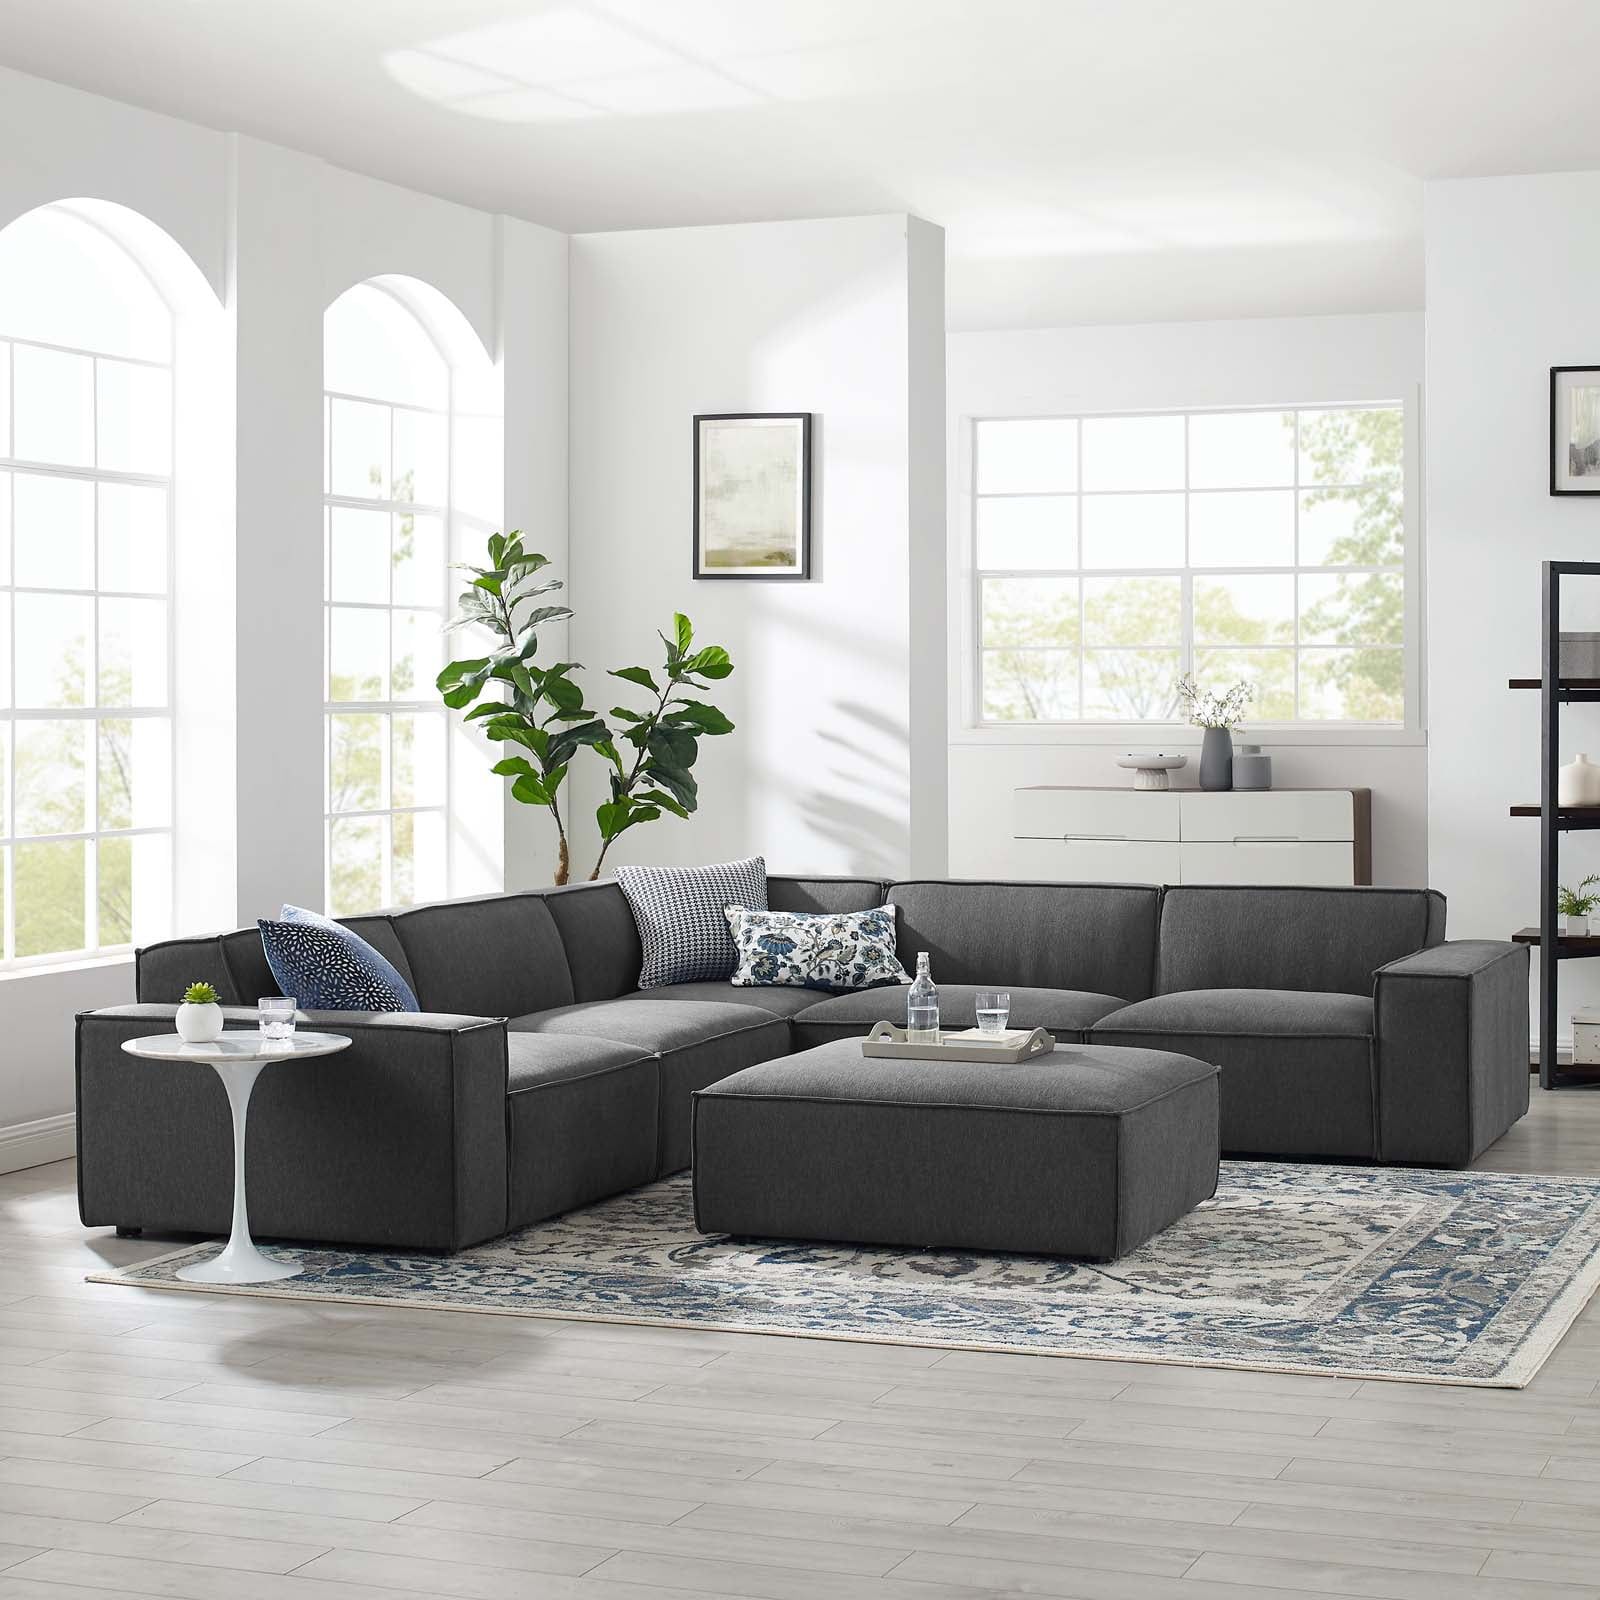 Modway Restore 6 Piece Sectional Sofa, Multiple Colors – Walmart Pertaining To Sofas In Multiple Colors (Gallery 3 of 20)